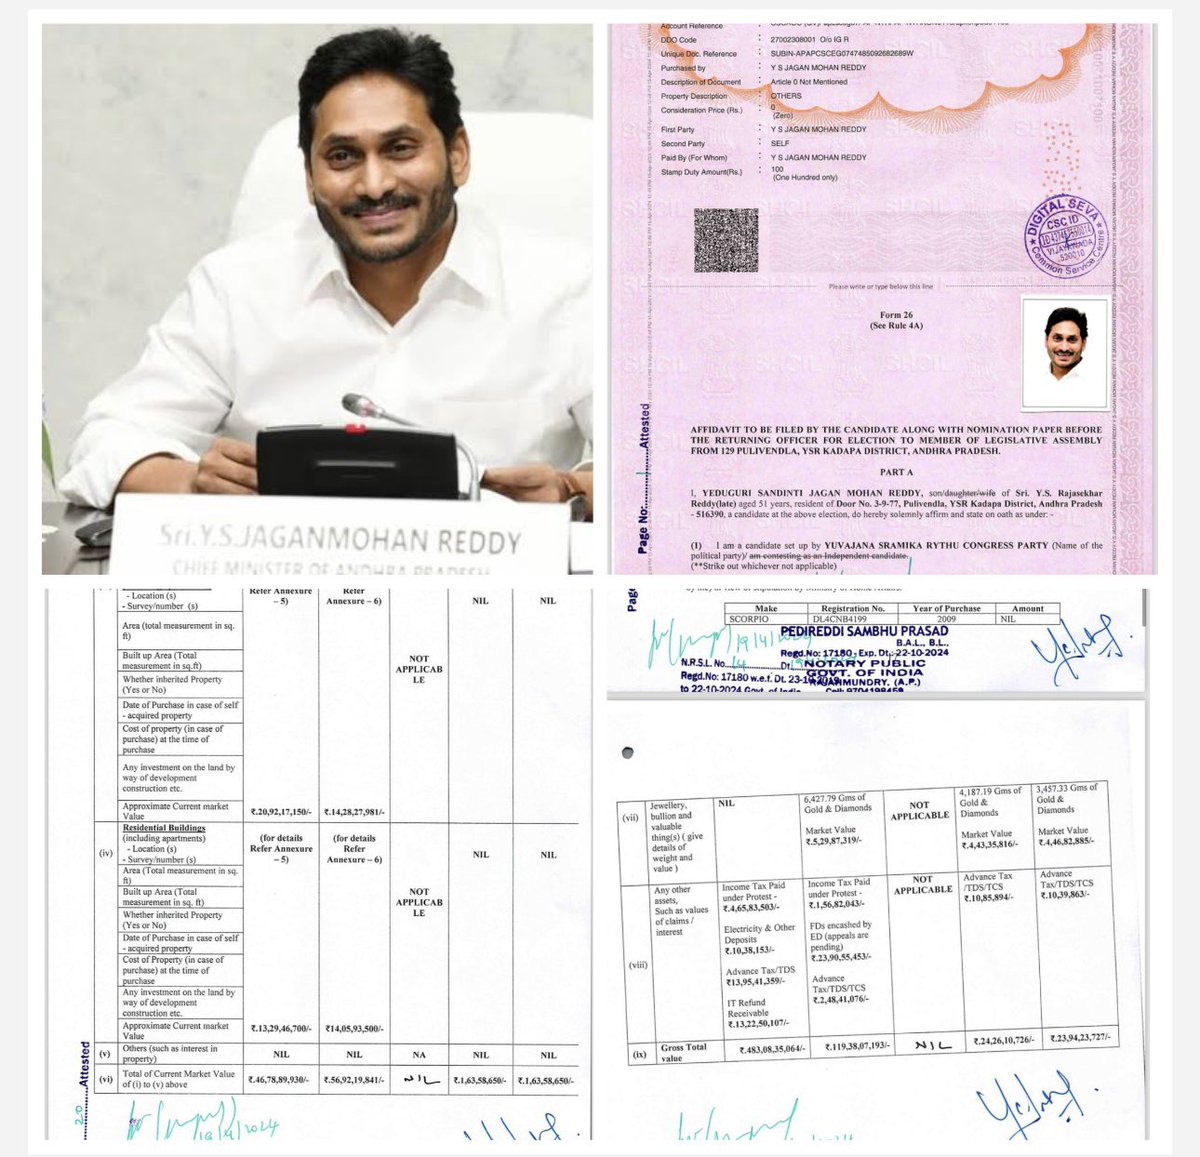 Andhra Chief Minister Y S Jagan’s assets grew by 48 per cent in five years. As per his self declared affidavit Jagan and his family own assets worth Rs 757 crore that include movable assets worth Rs 650 crore immovable assets worth Rs 107 crore. In 2019 his and family’s assets